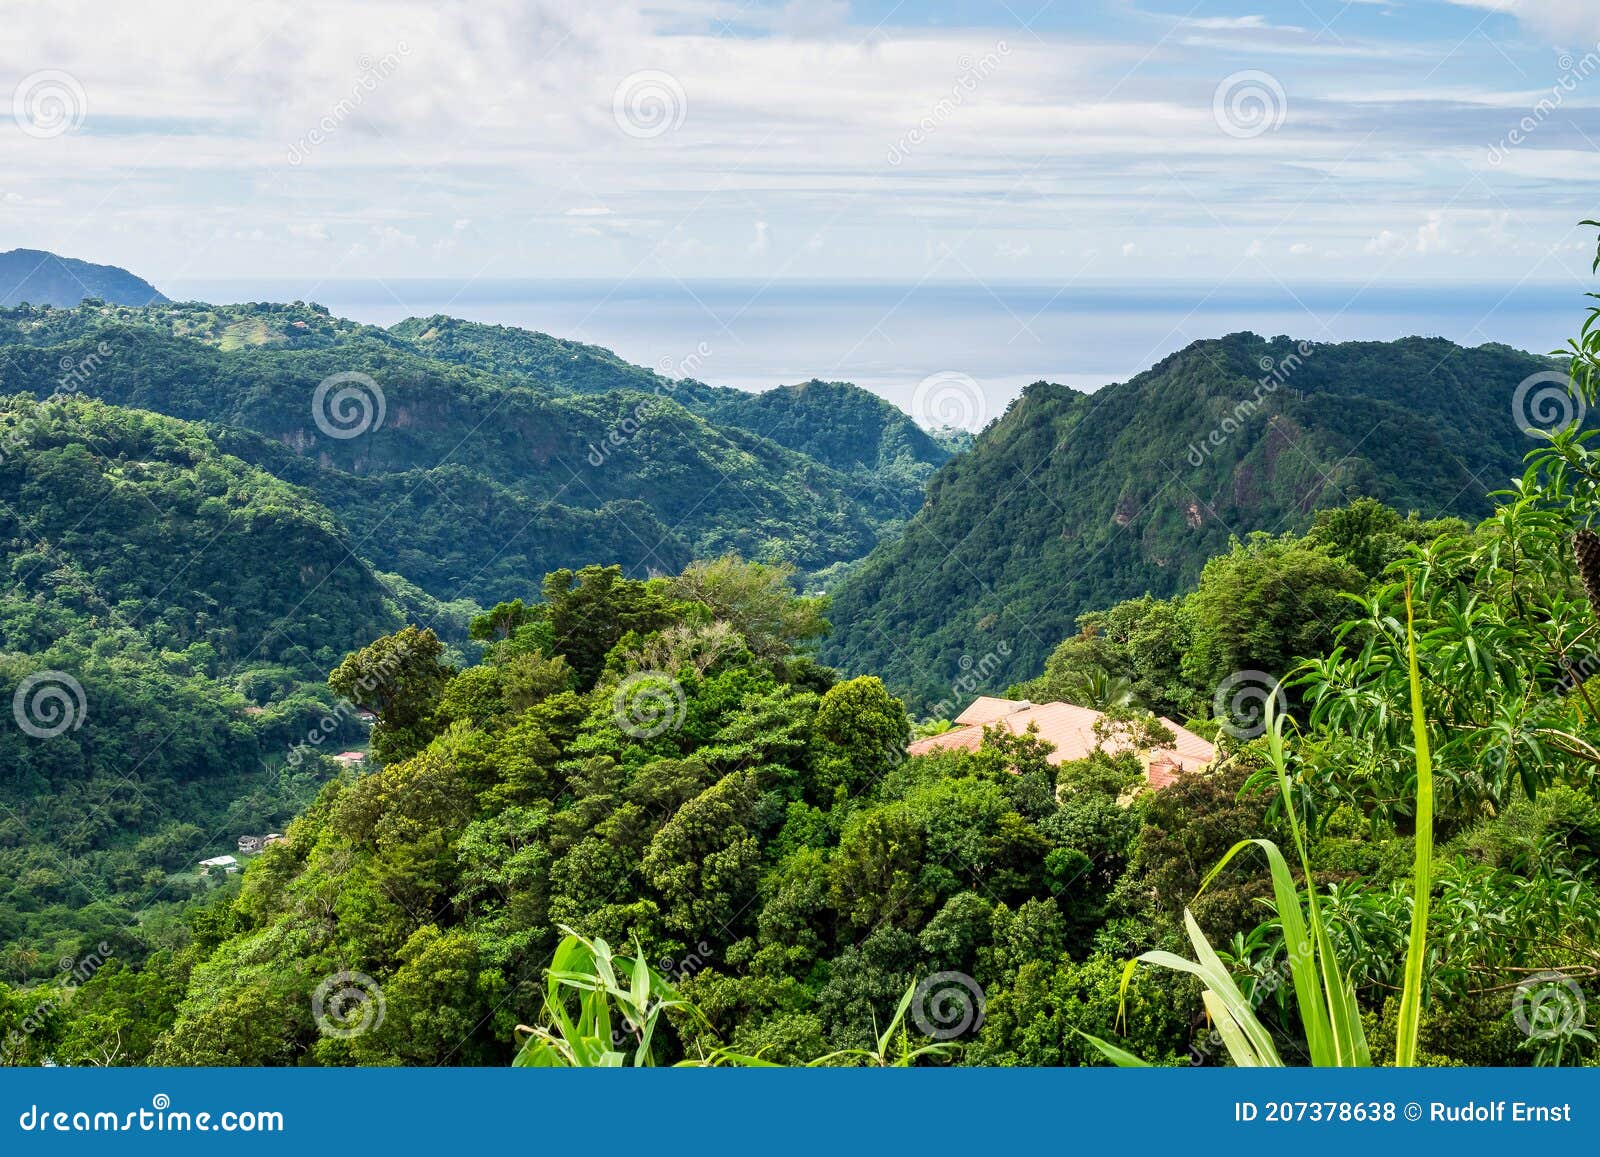 landscape view on trail to the trafalgar waterfalls. morne trois pitons national park, dominica, leeward islands